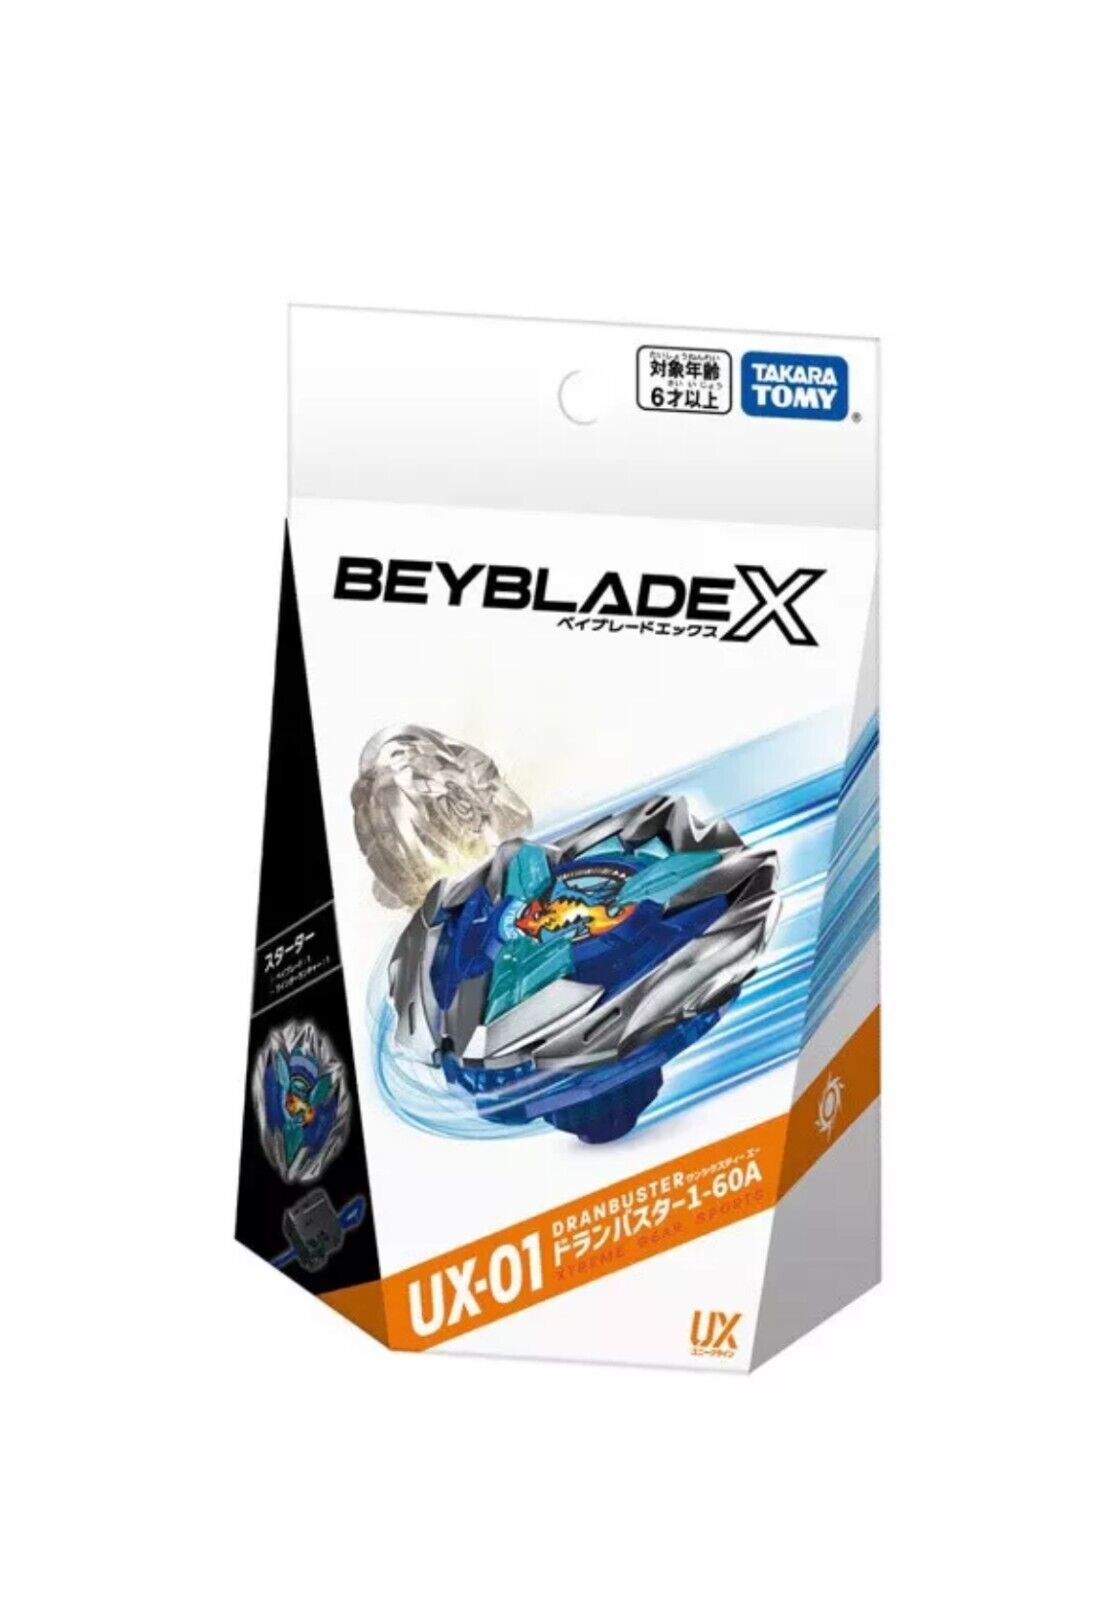 Primary image for Dran Buster Beyblade UX-01 ・USA SELLER Takara Tomy Dran Buster 1-60A